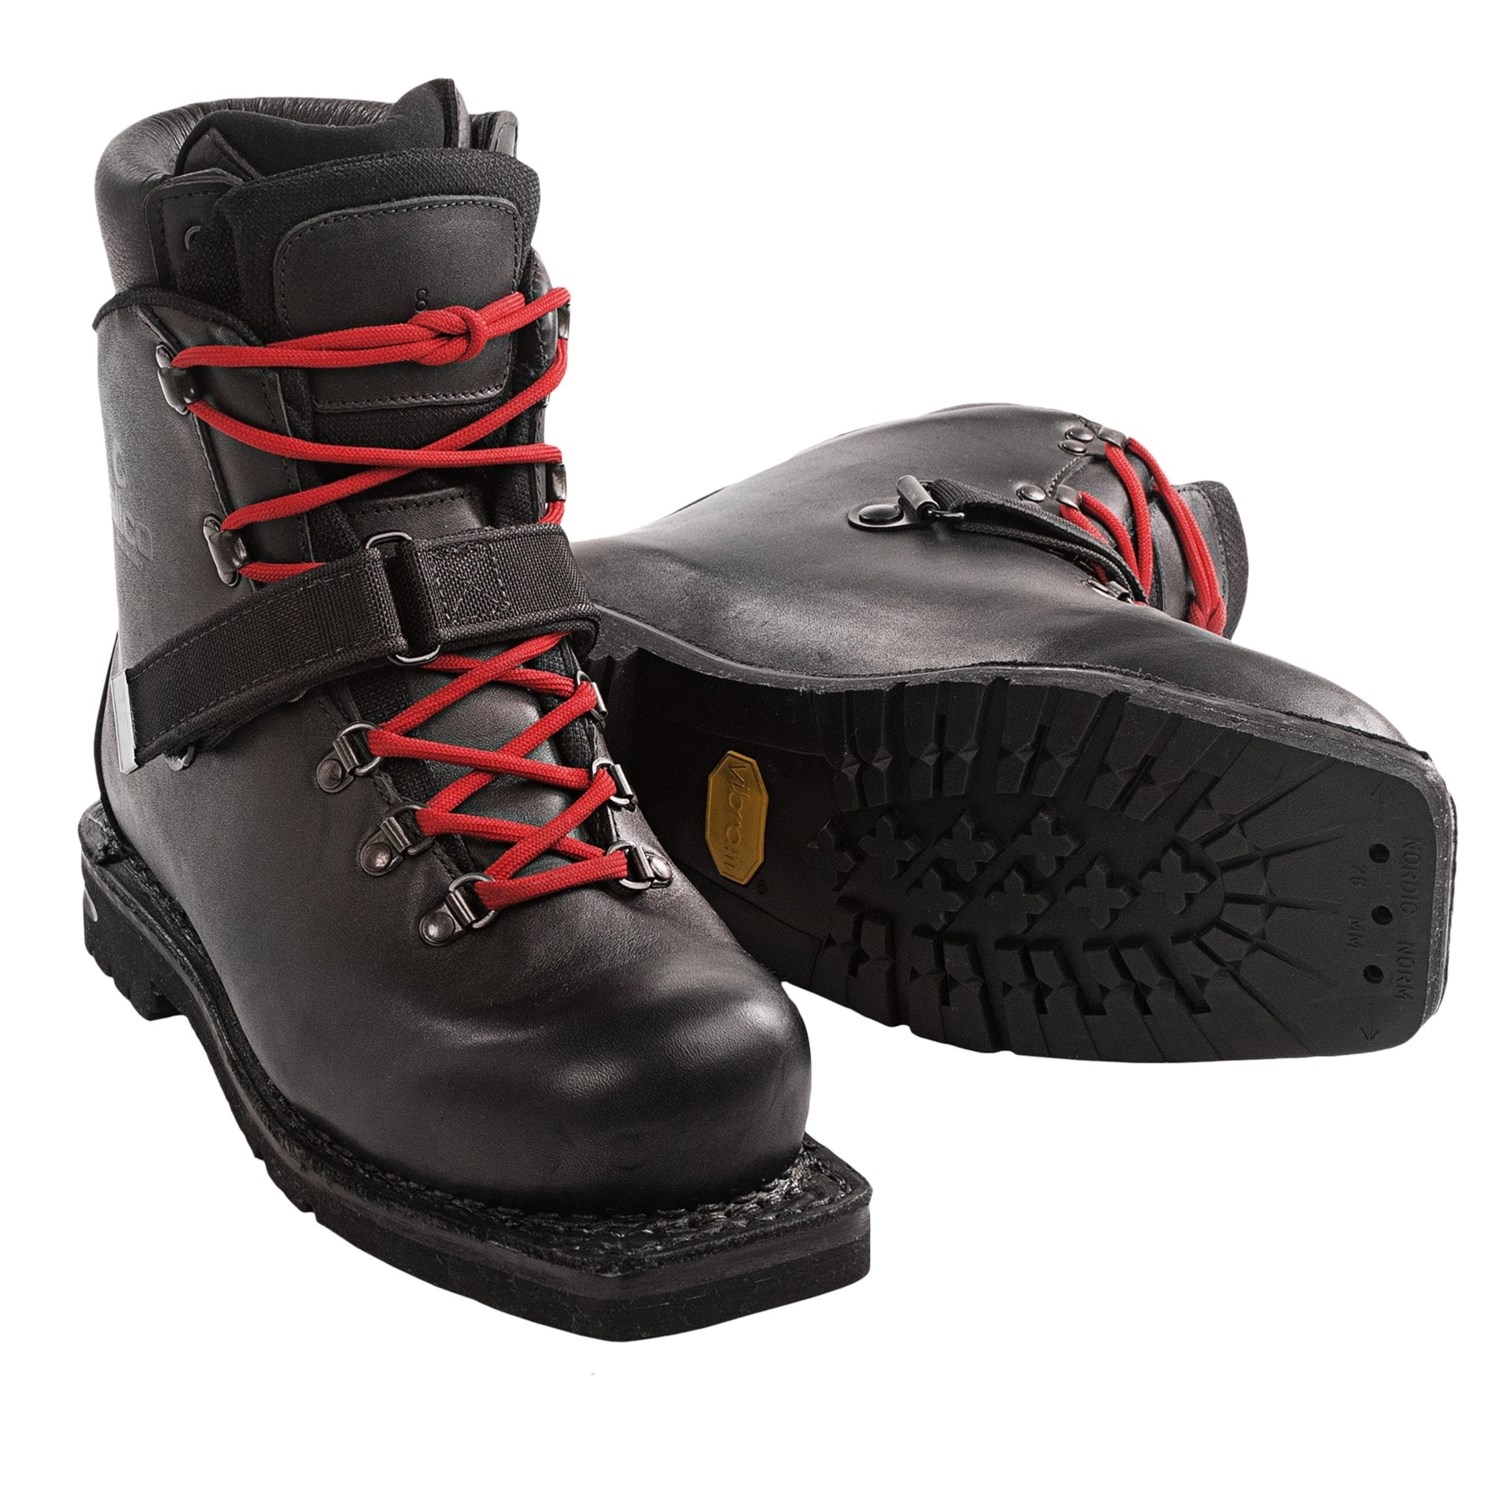 Alico Made in Italy Telemark Ski Boots 